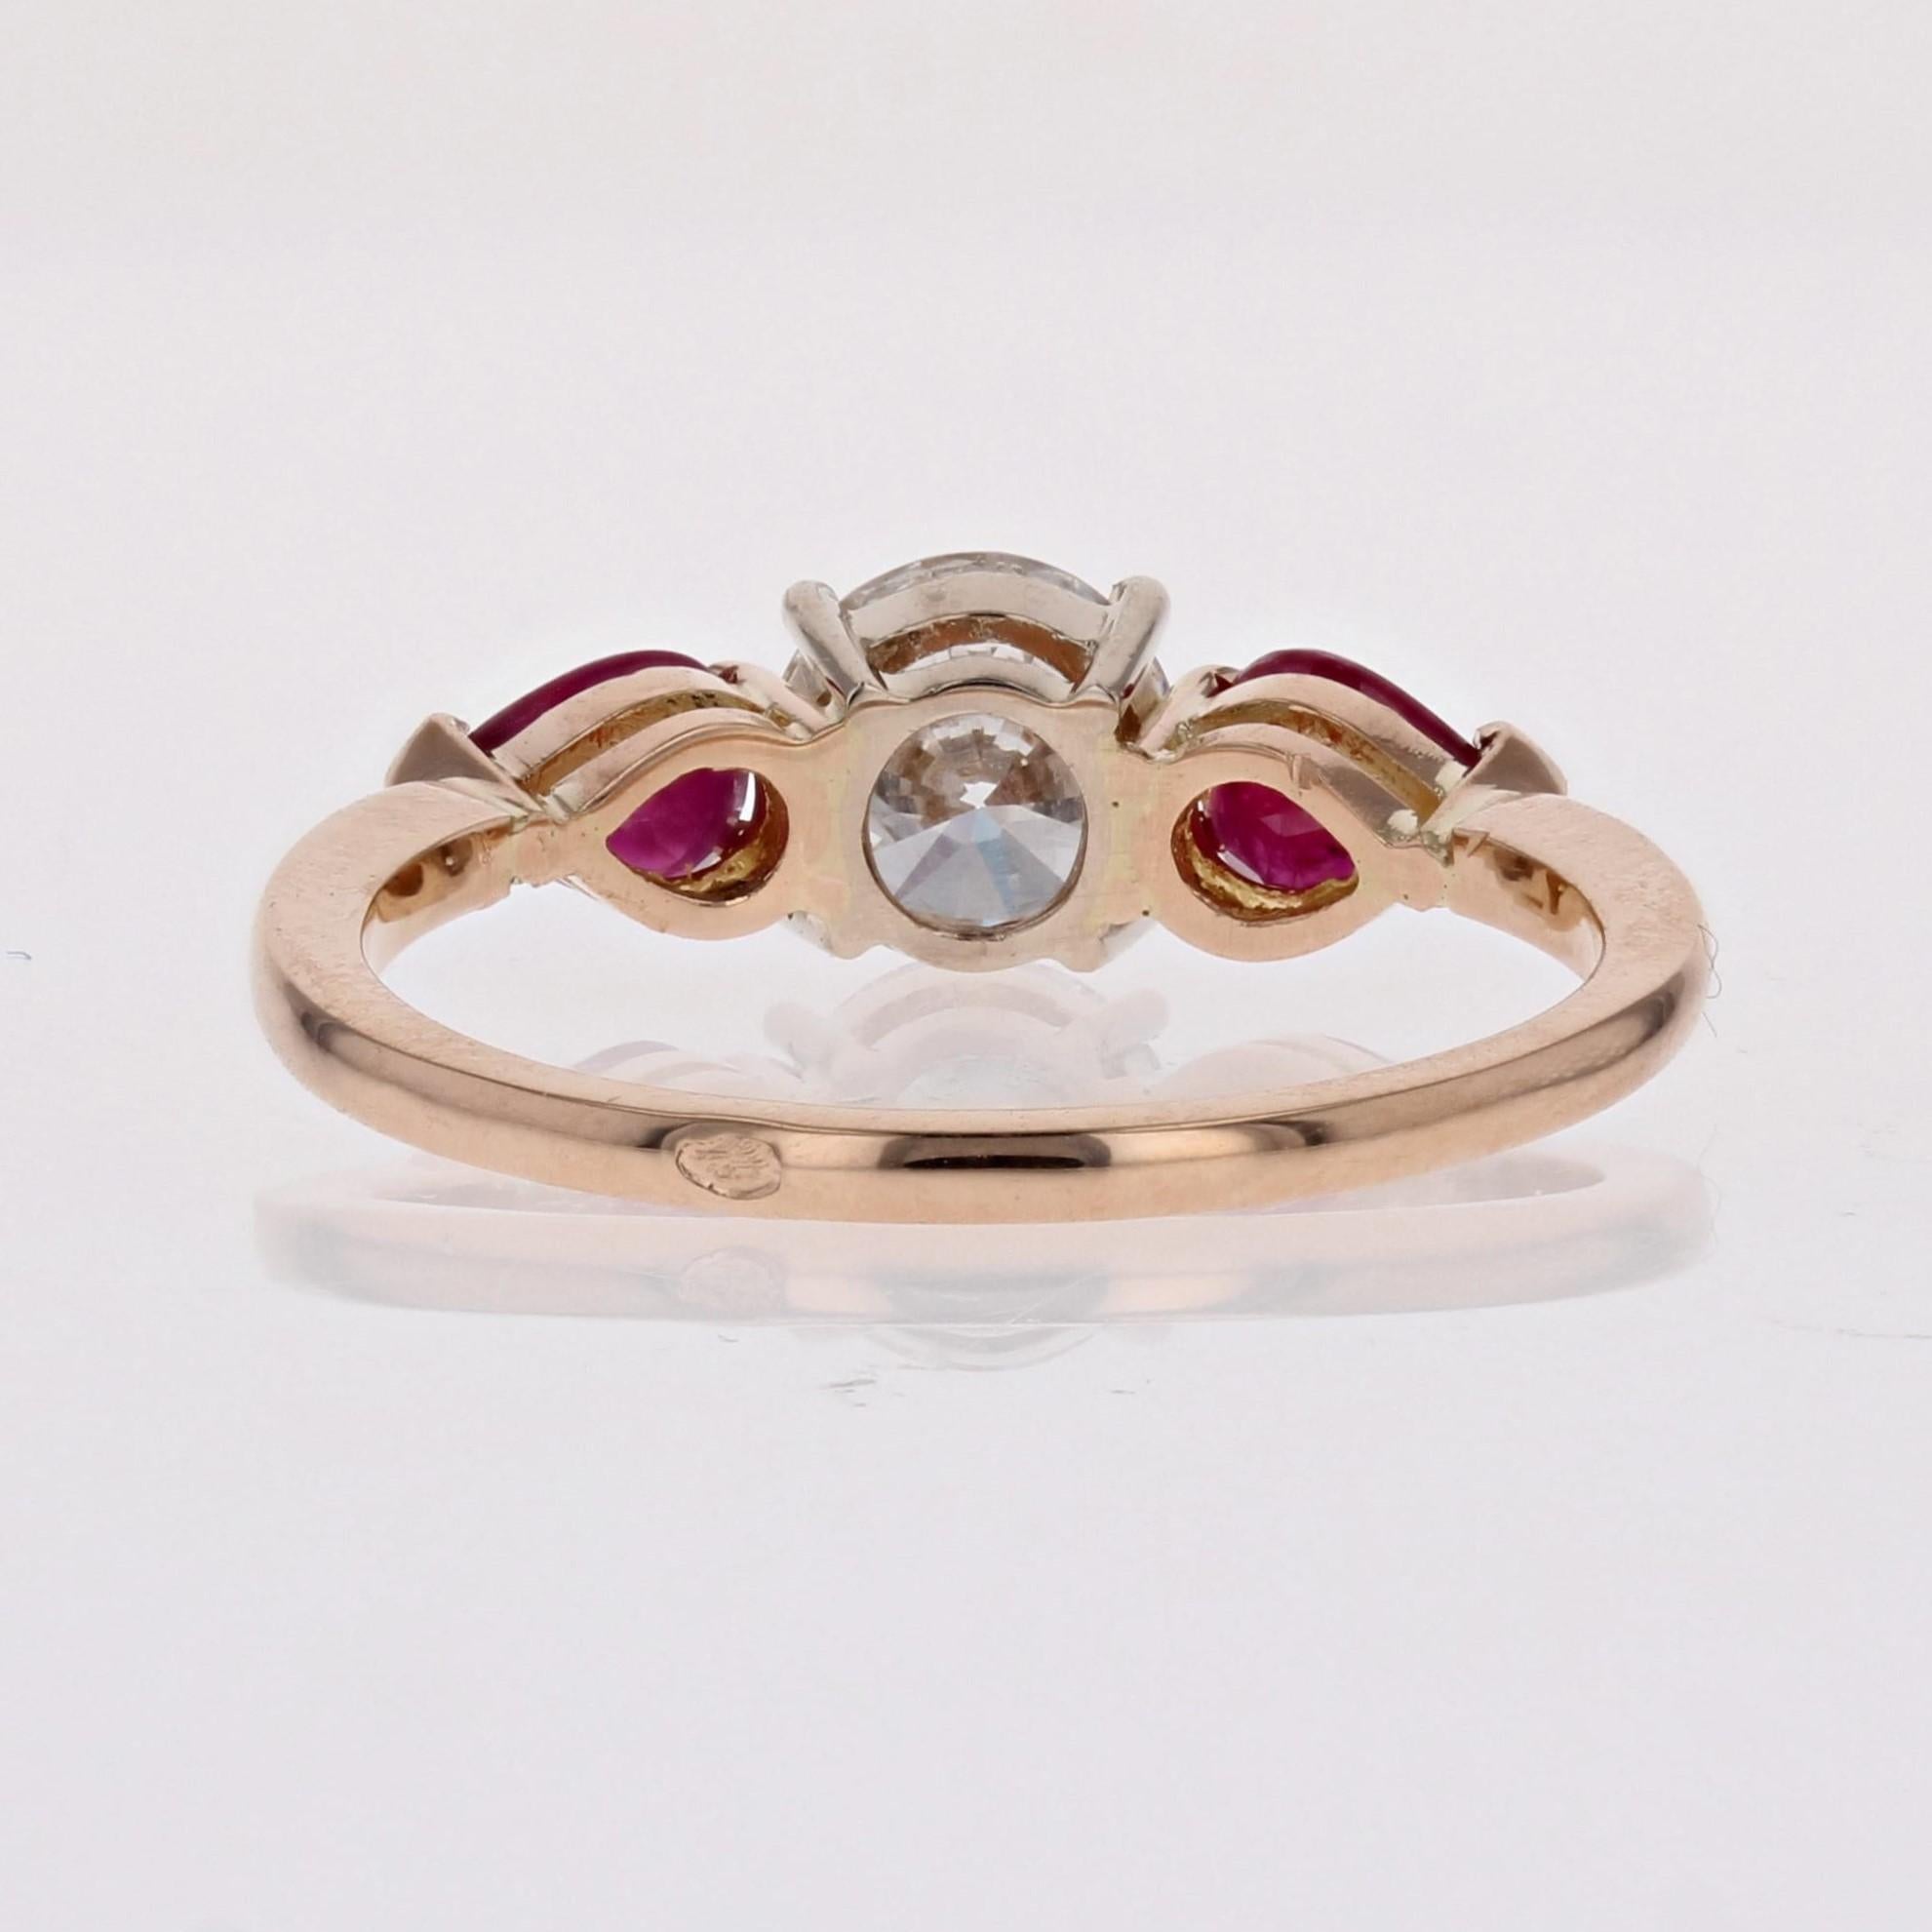 Baume Creation Rubies E.VVS Diamond Yellow Gold Trilogy Ring For Sale 6